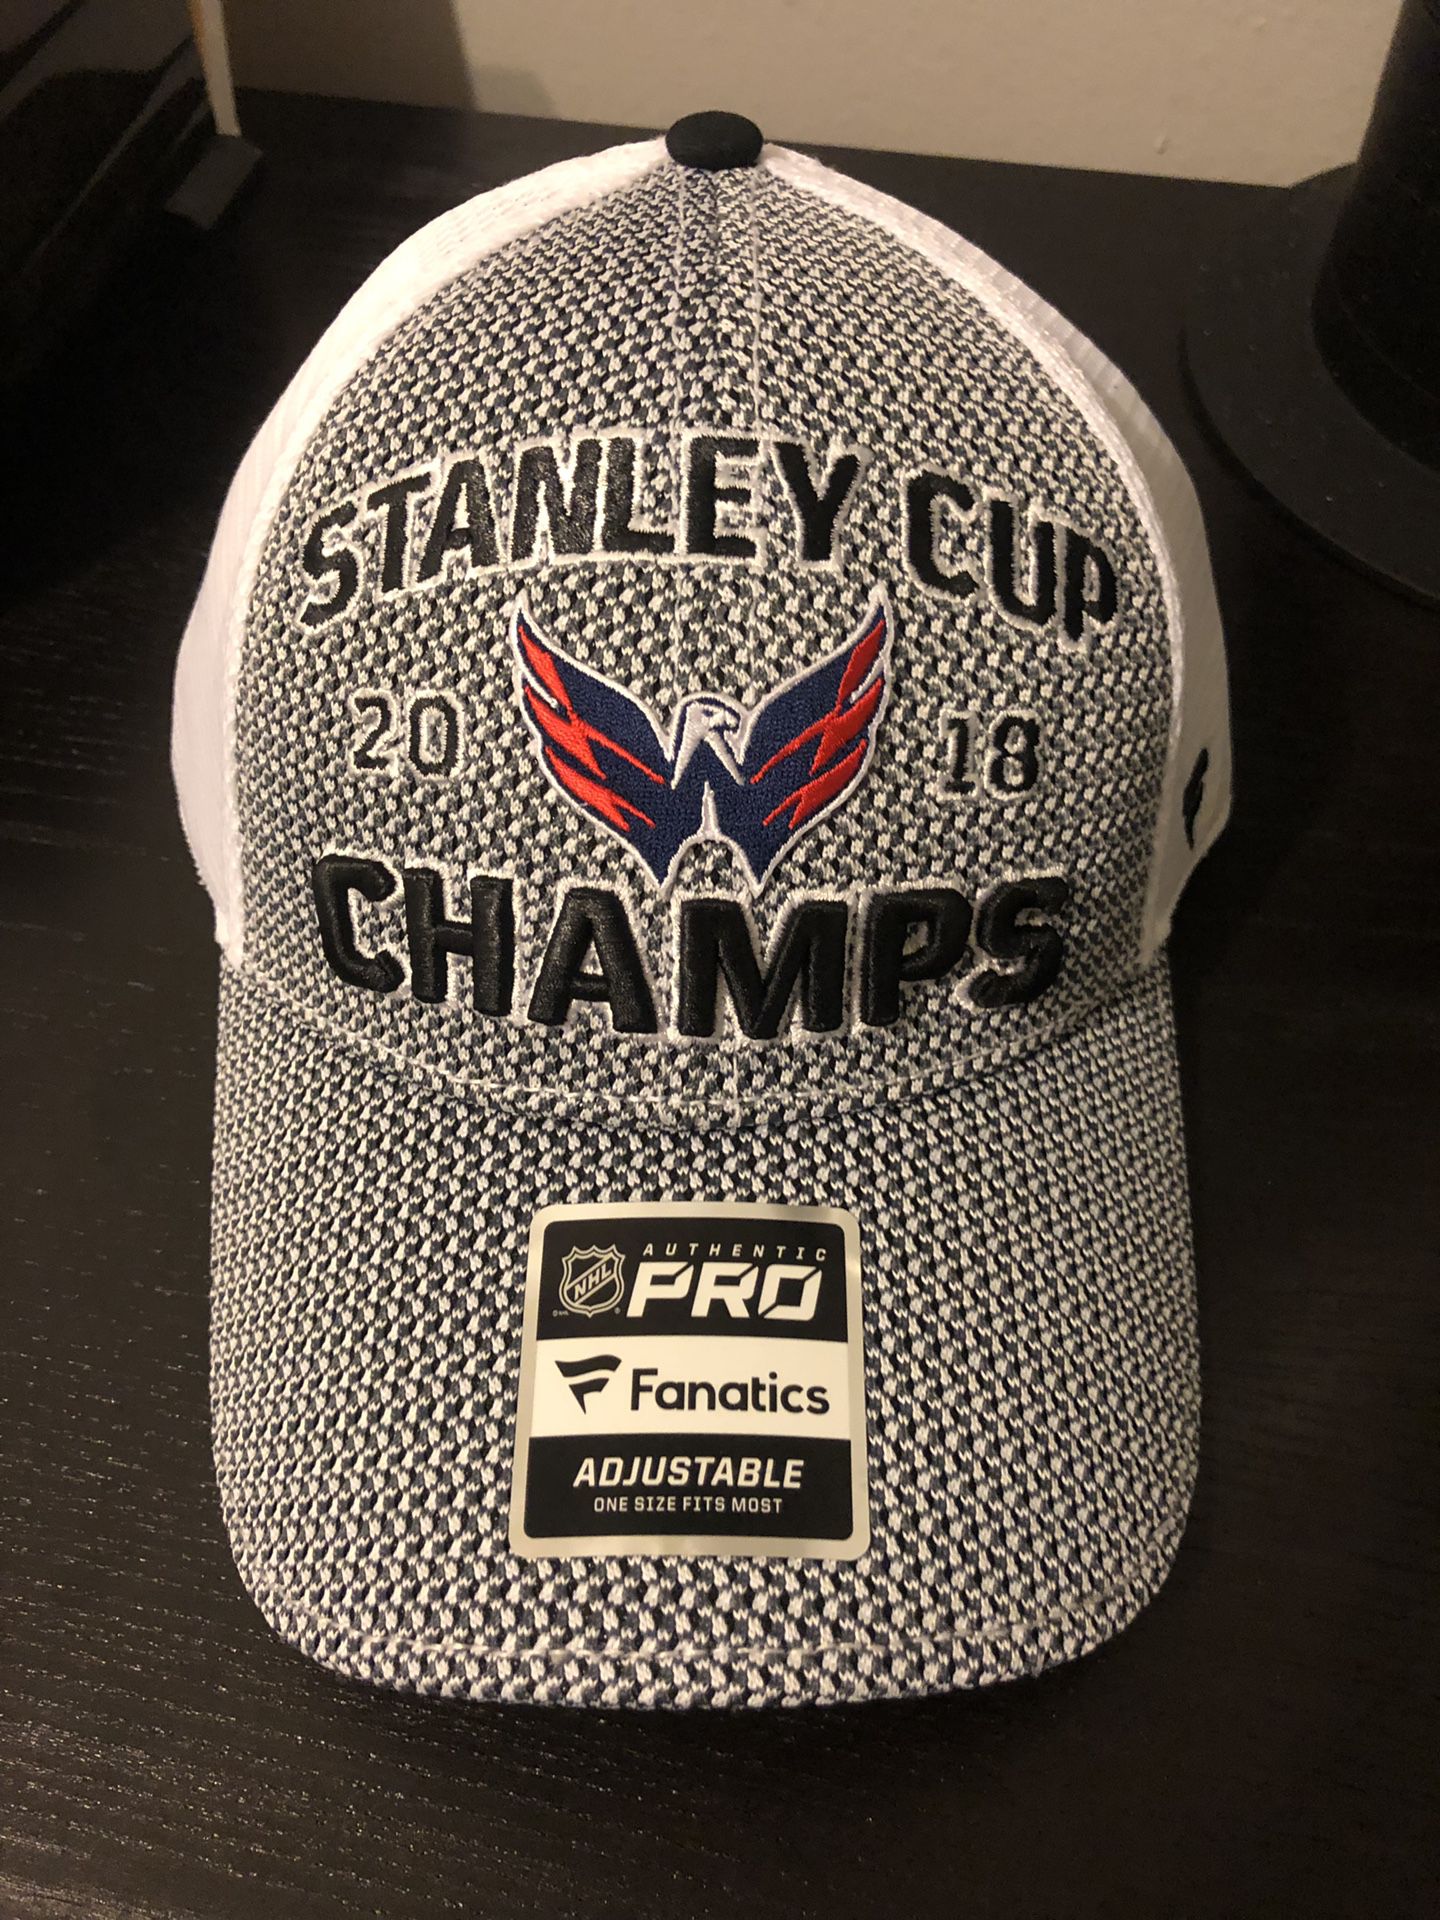 2018 Stanley cup champions hat